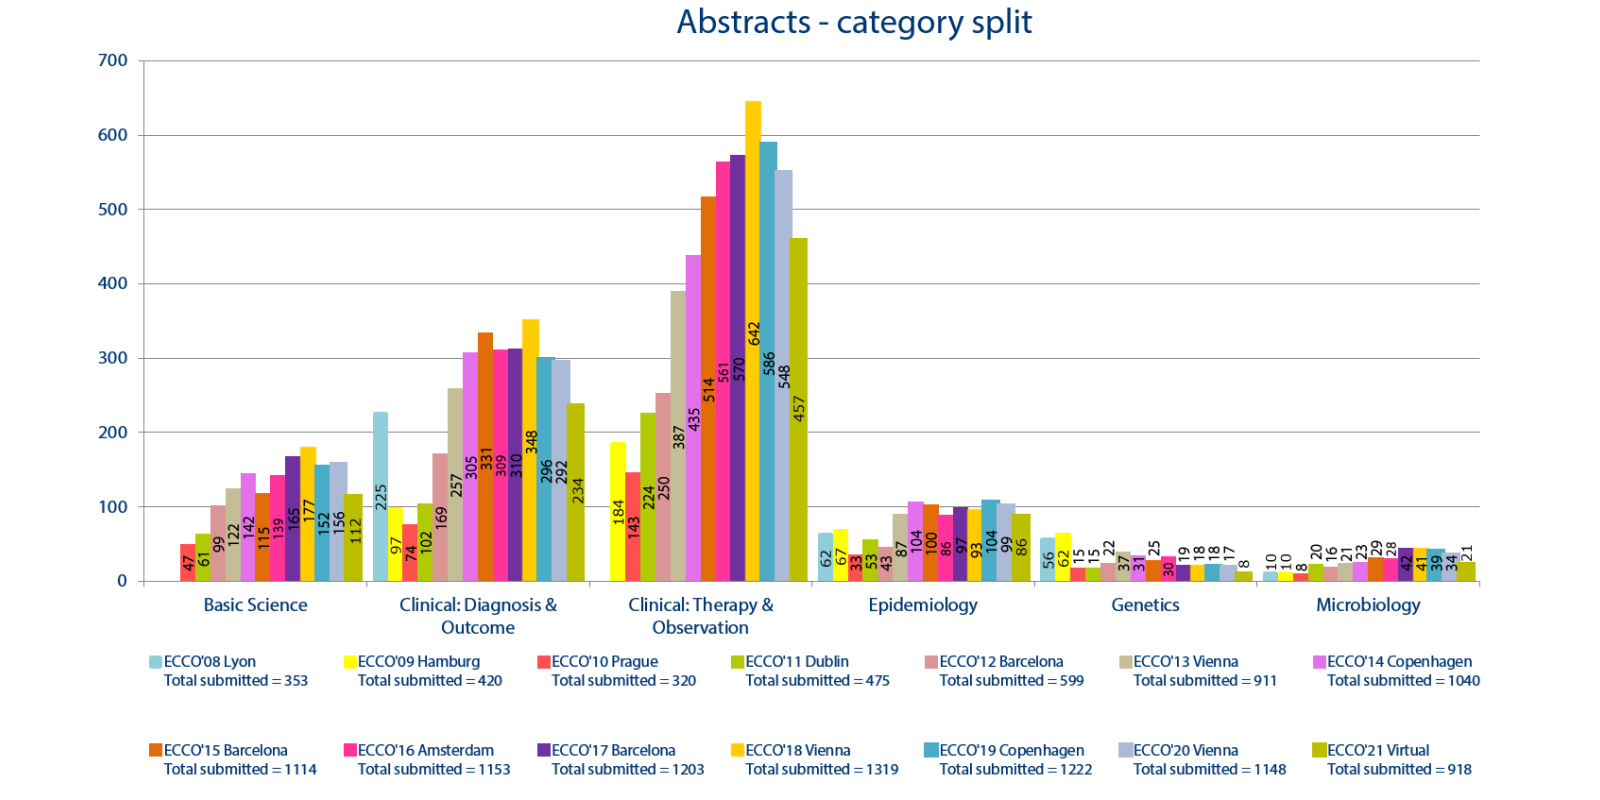 2021 Abstract categories